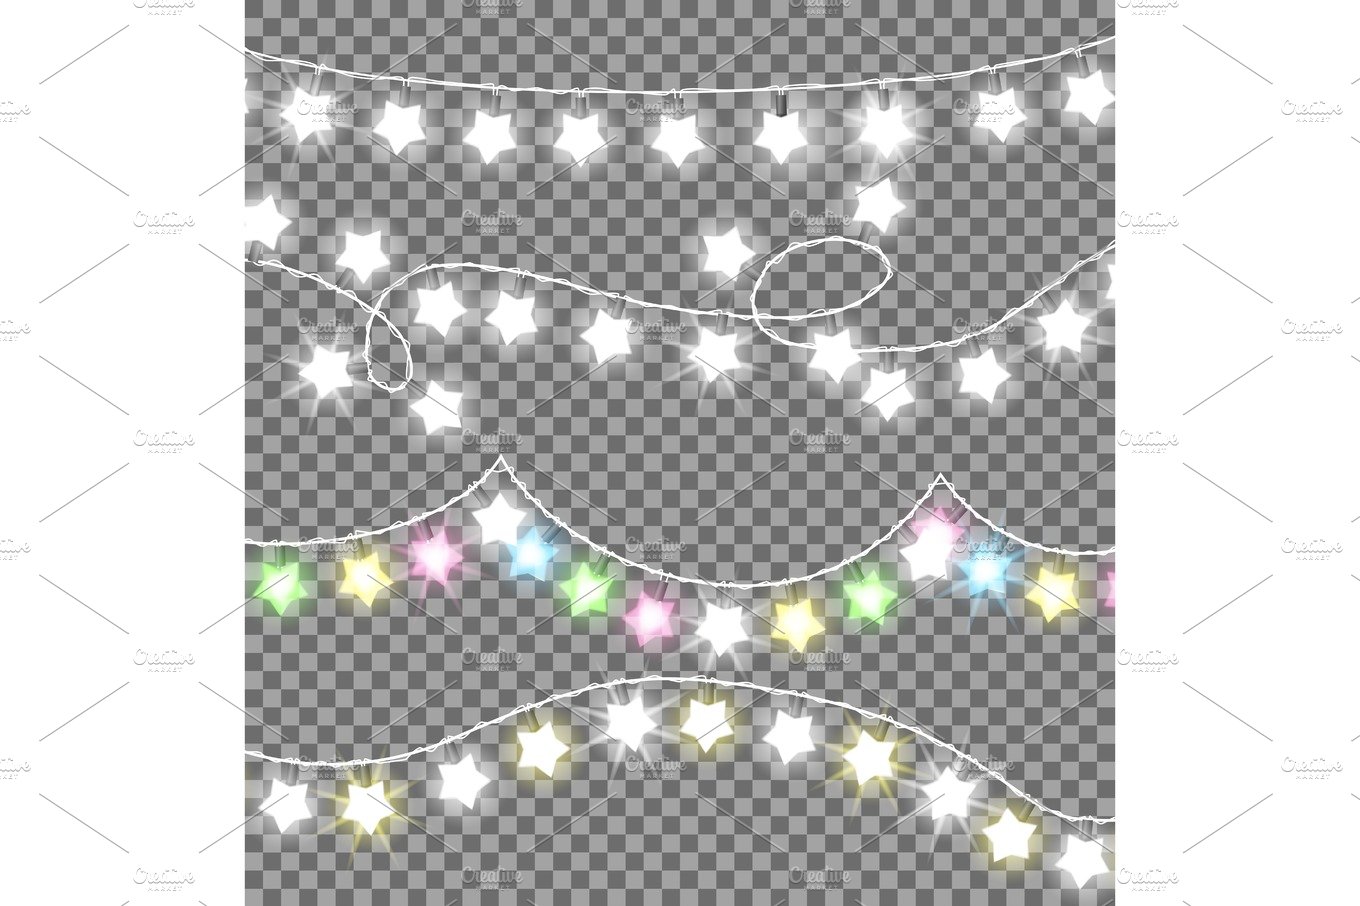 Garland Ropes with Bulbs on Transparent Background cover image.